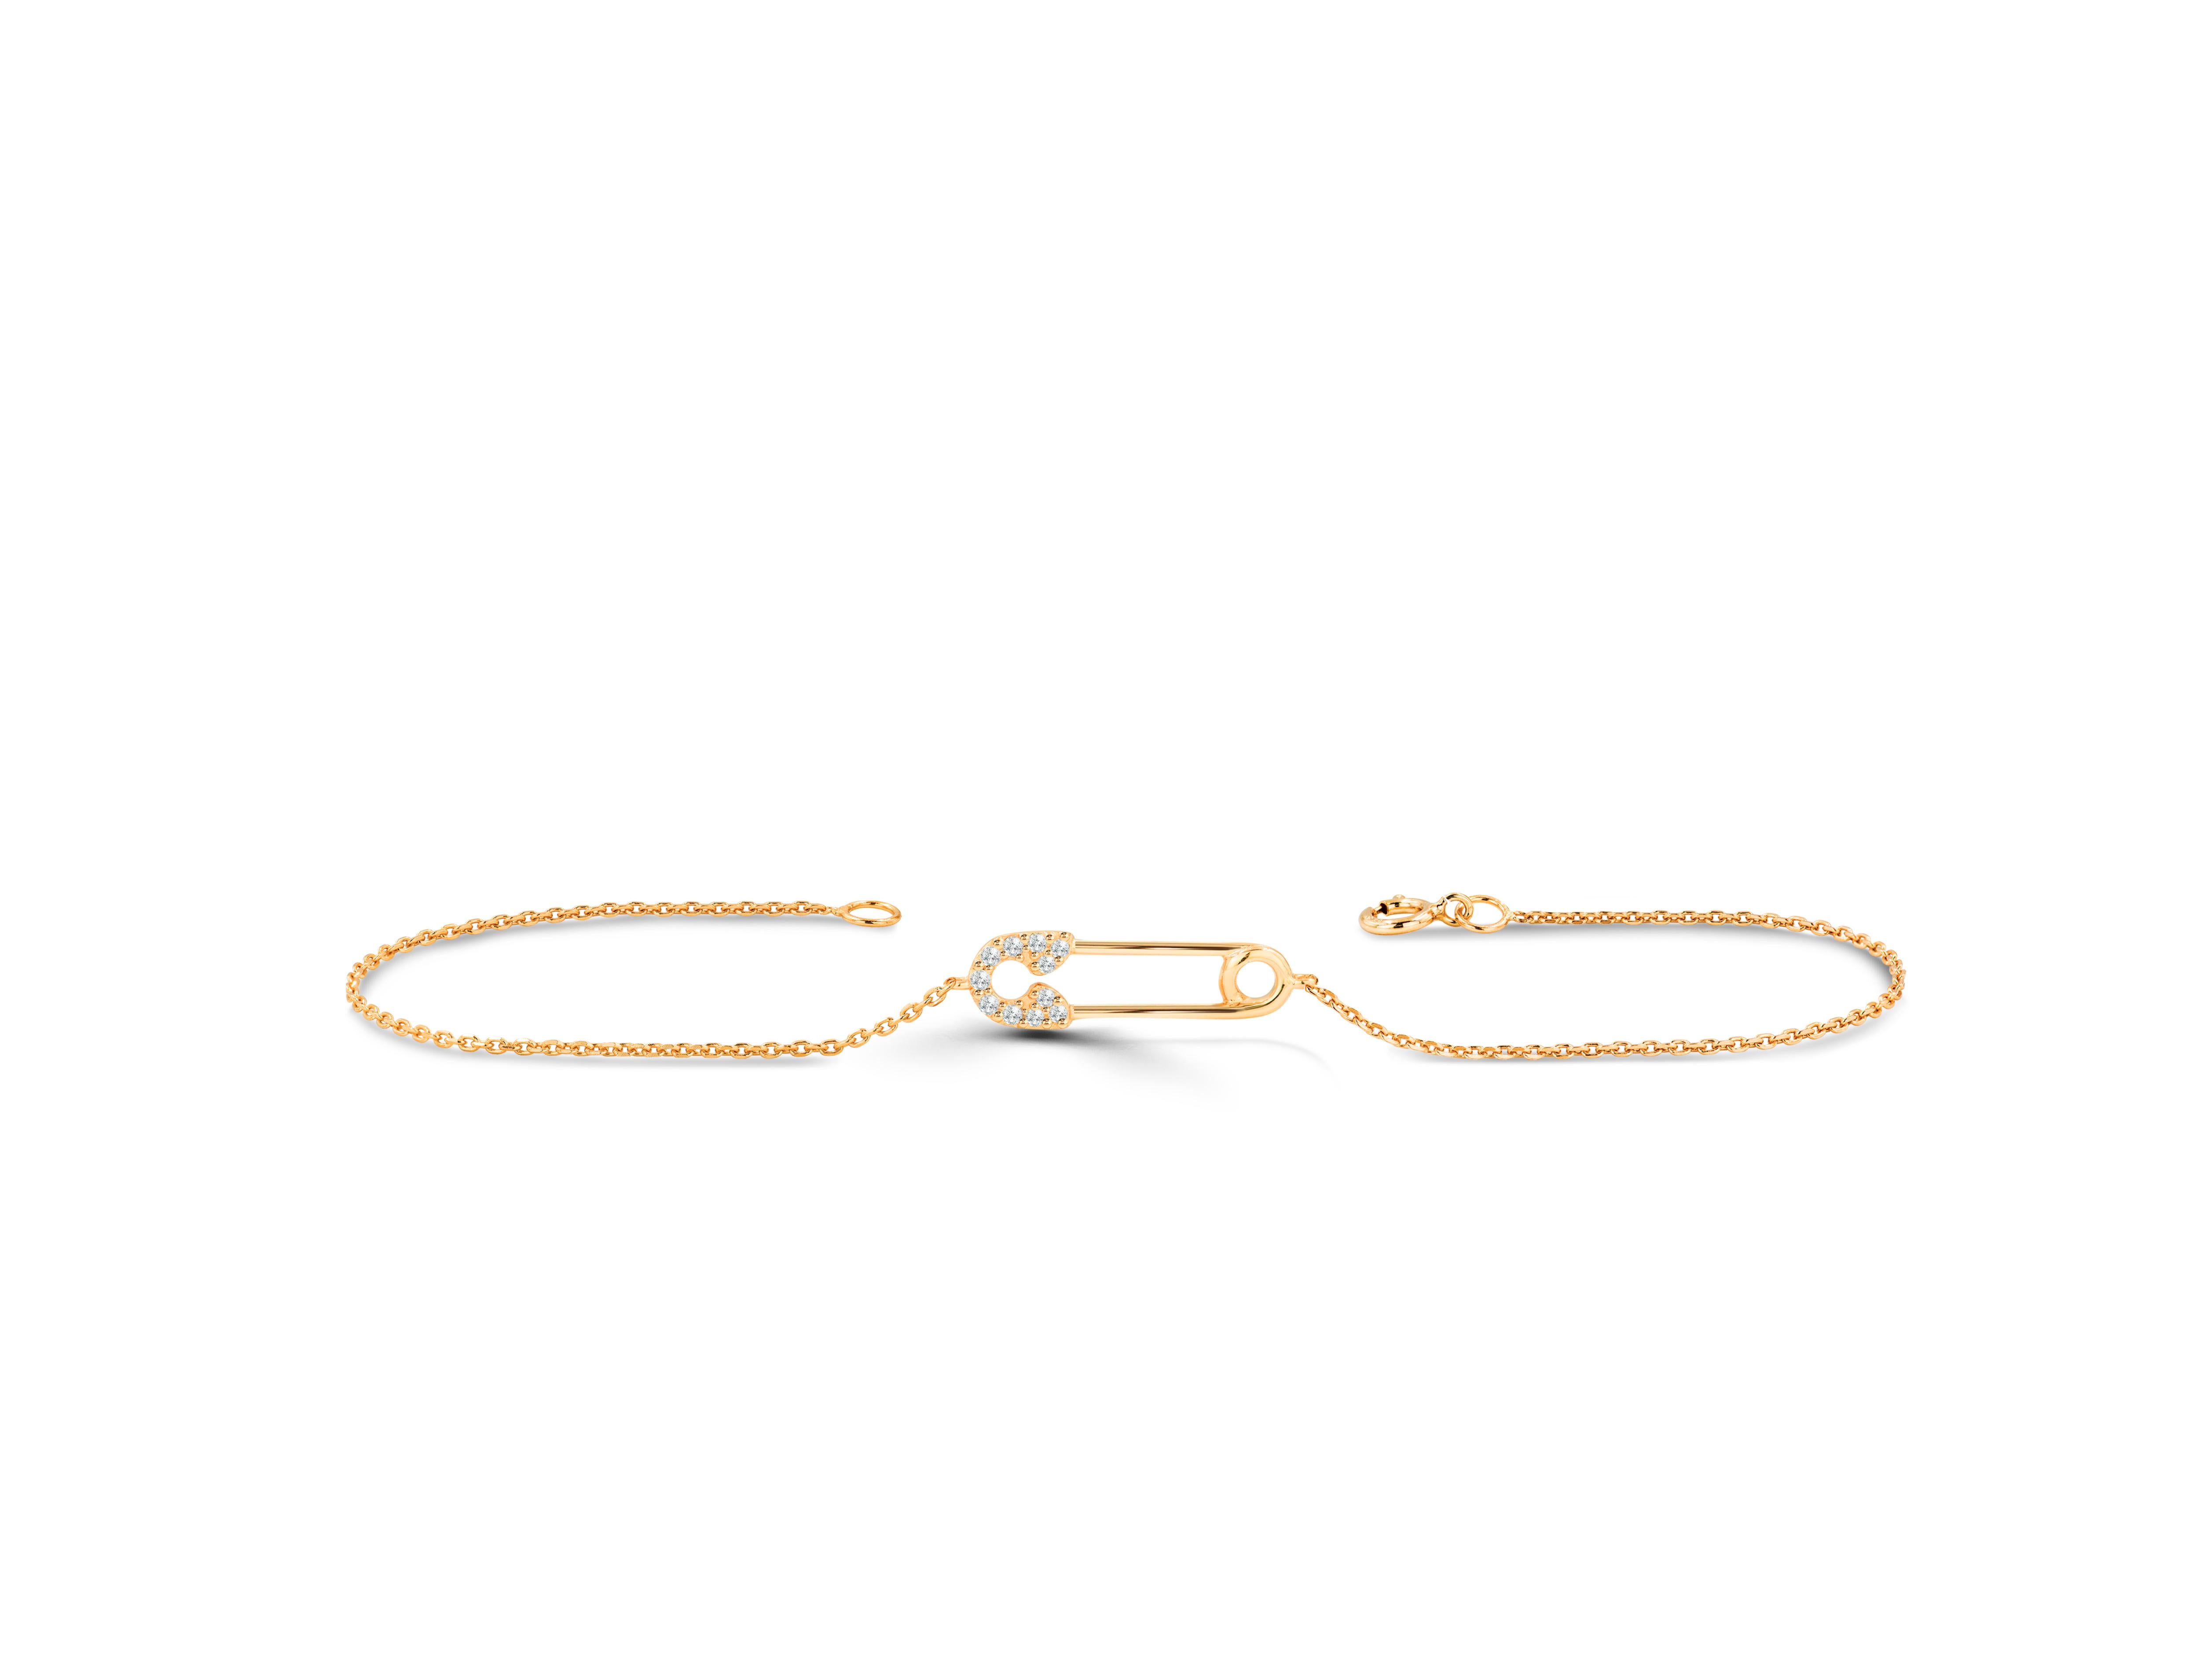 Beautiful and elegant, this safety pin bracelet is made with pure gold and consists of genuine and natural diamonds. This minimalist bracelet gives a sophisticated yet classy look to your hand, the bracelet can be personalized in any gold color you